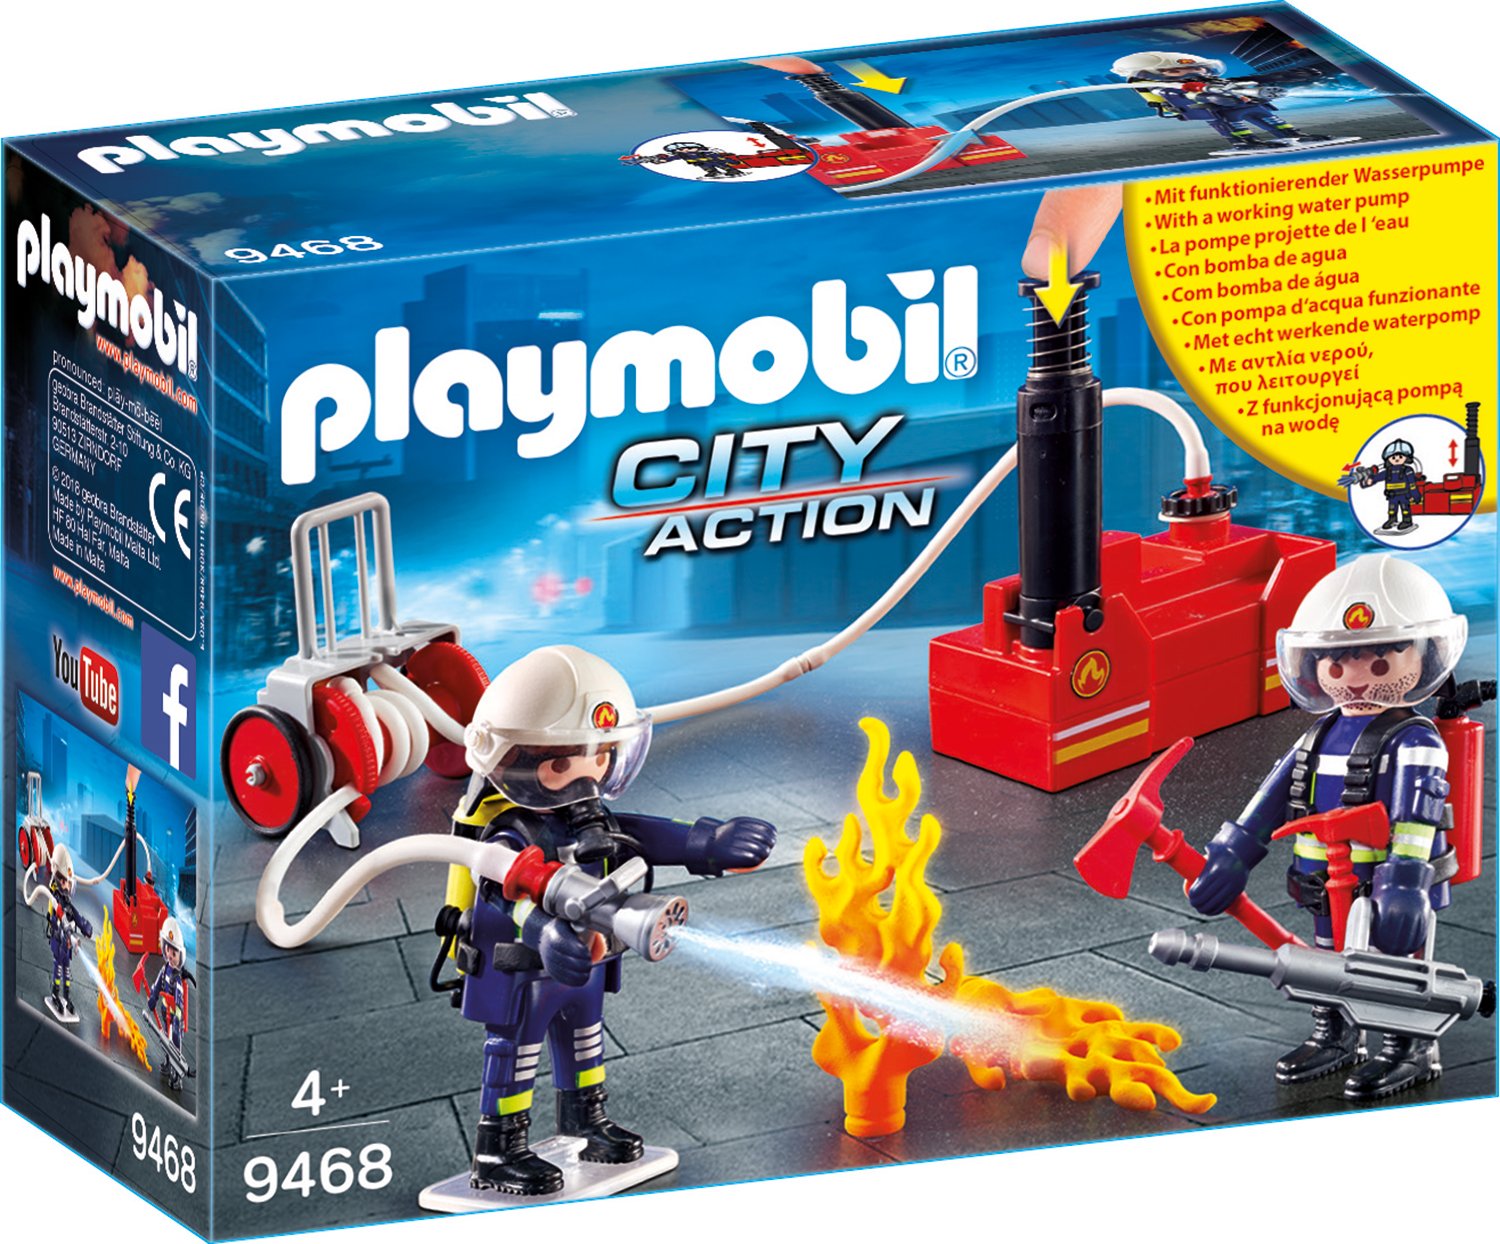 Playmobil Fire Fighters Toy With Fire Pump